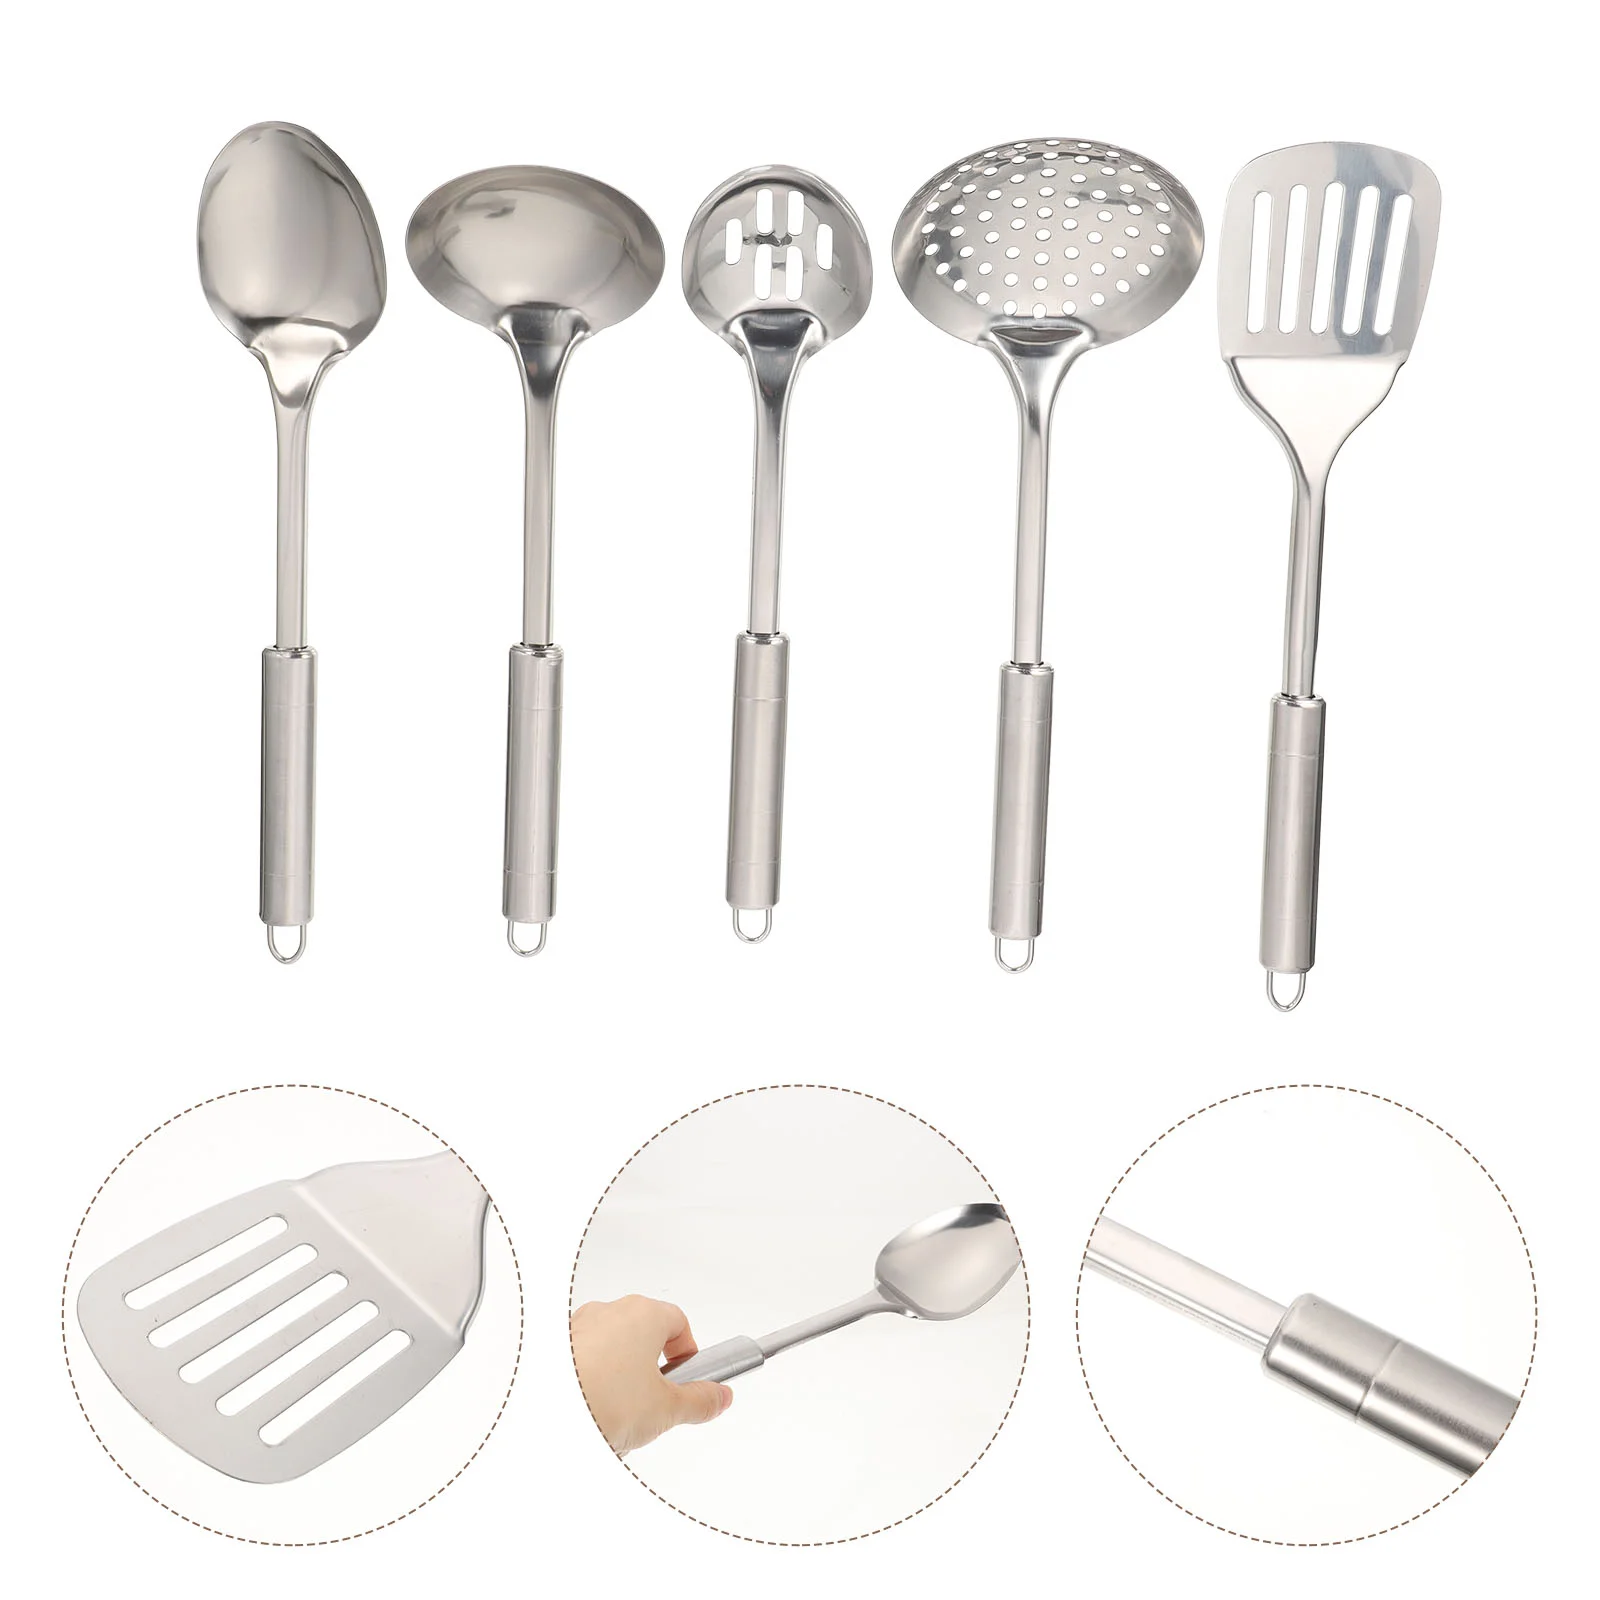 Kitchen Utensils Spoon Stainless Steel Slotted Cooking Set Spatula Serving Gadgets Utensil Practical Cookware Spatulas Turner